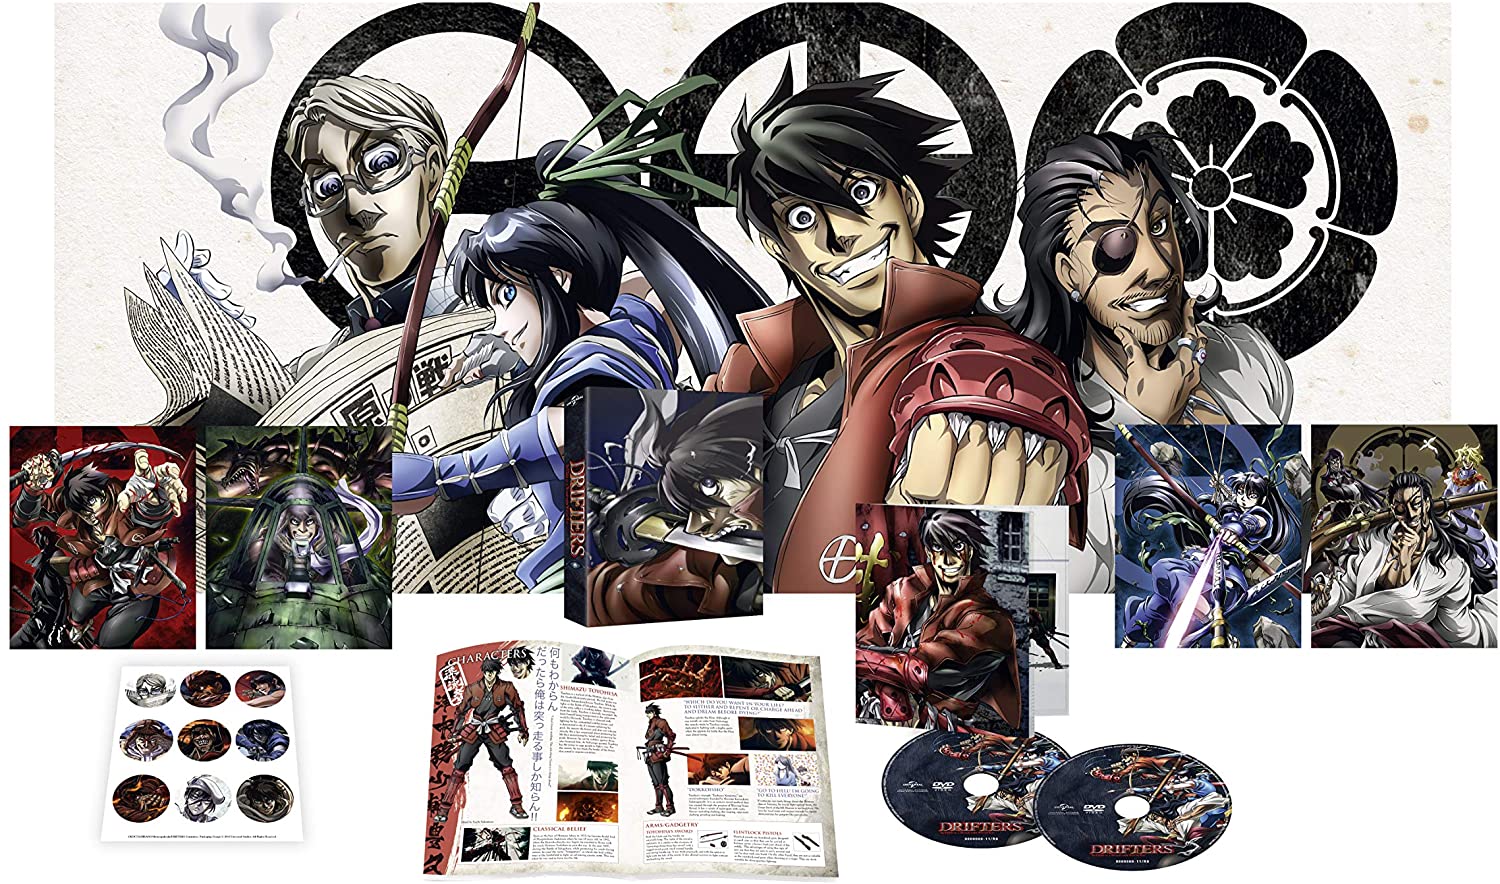 Drifters: The Complete Series (Blu-ray) 